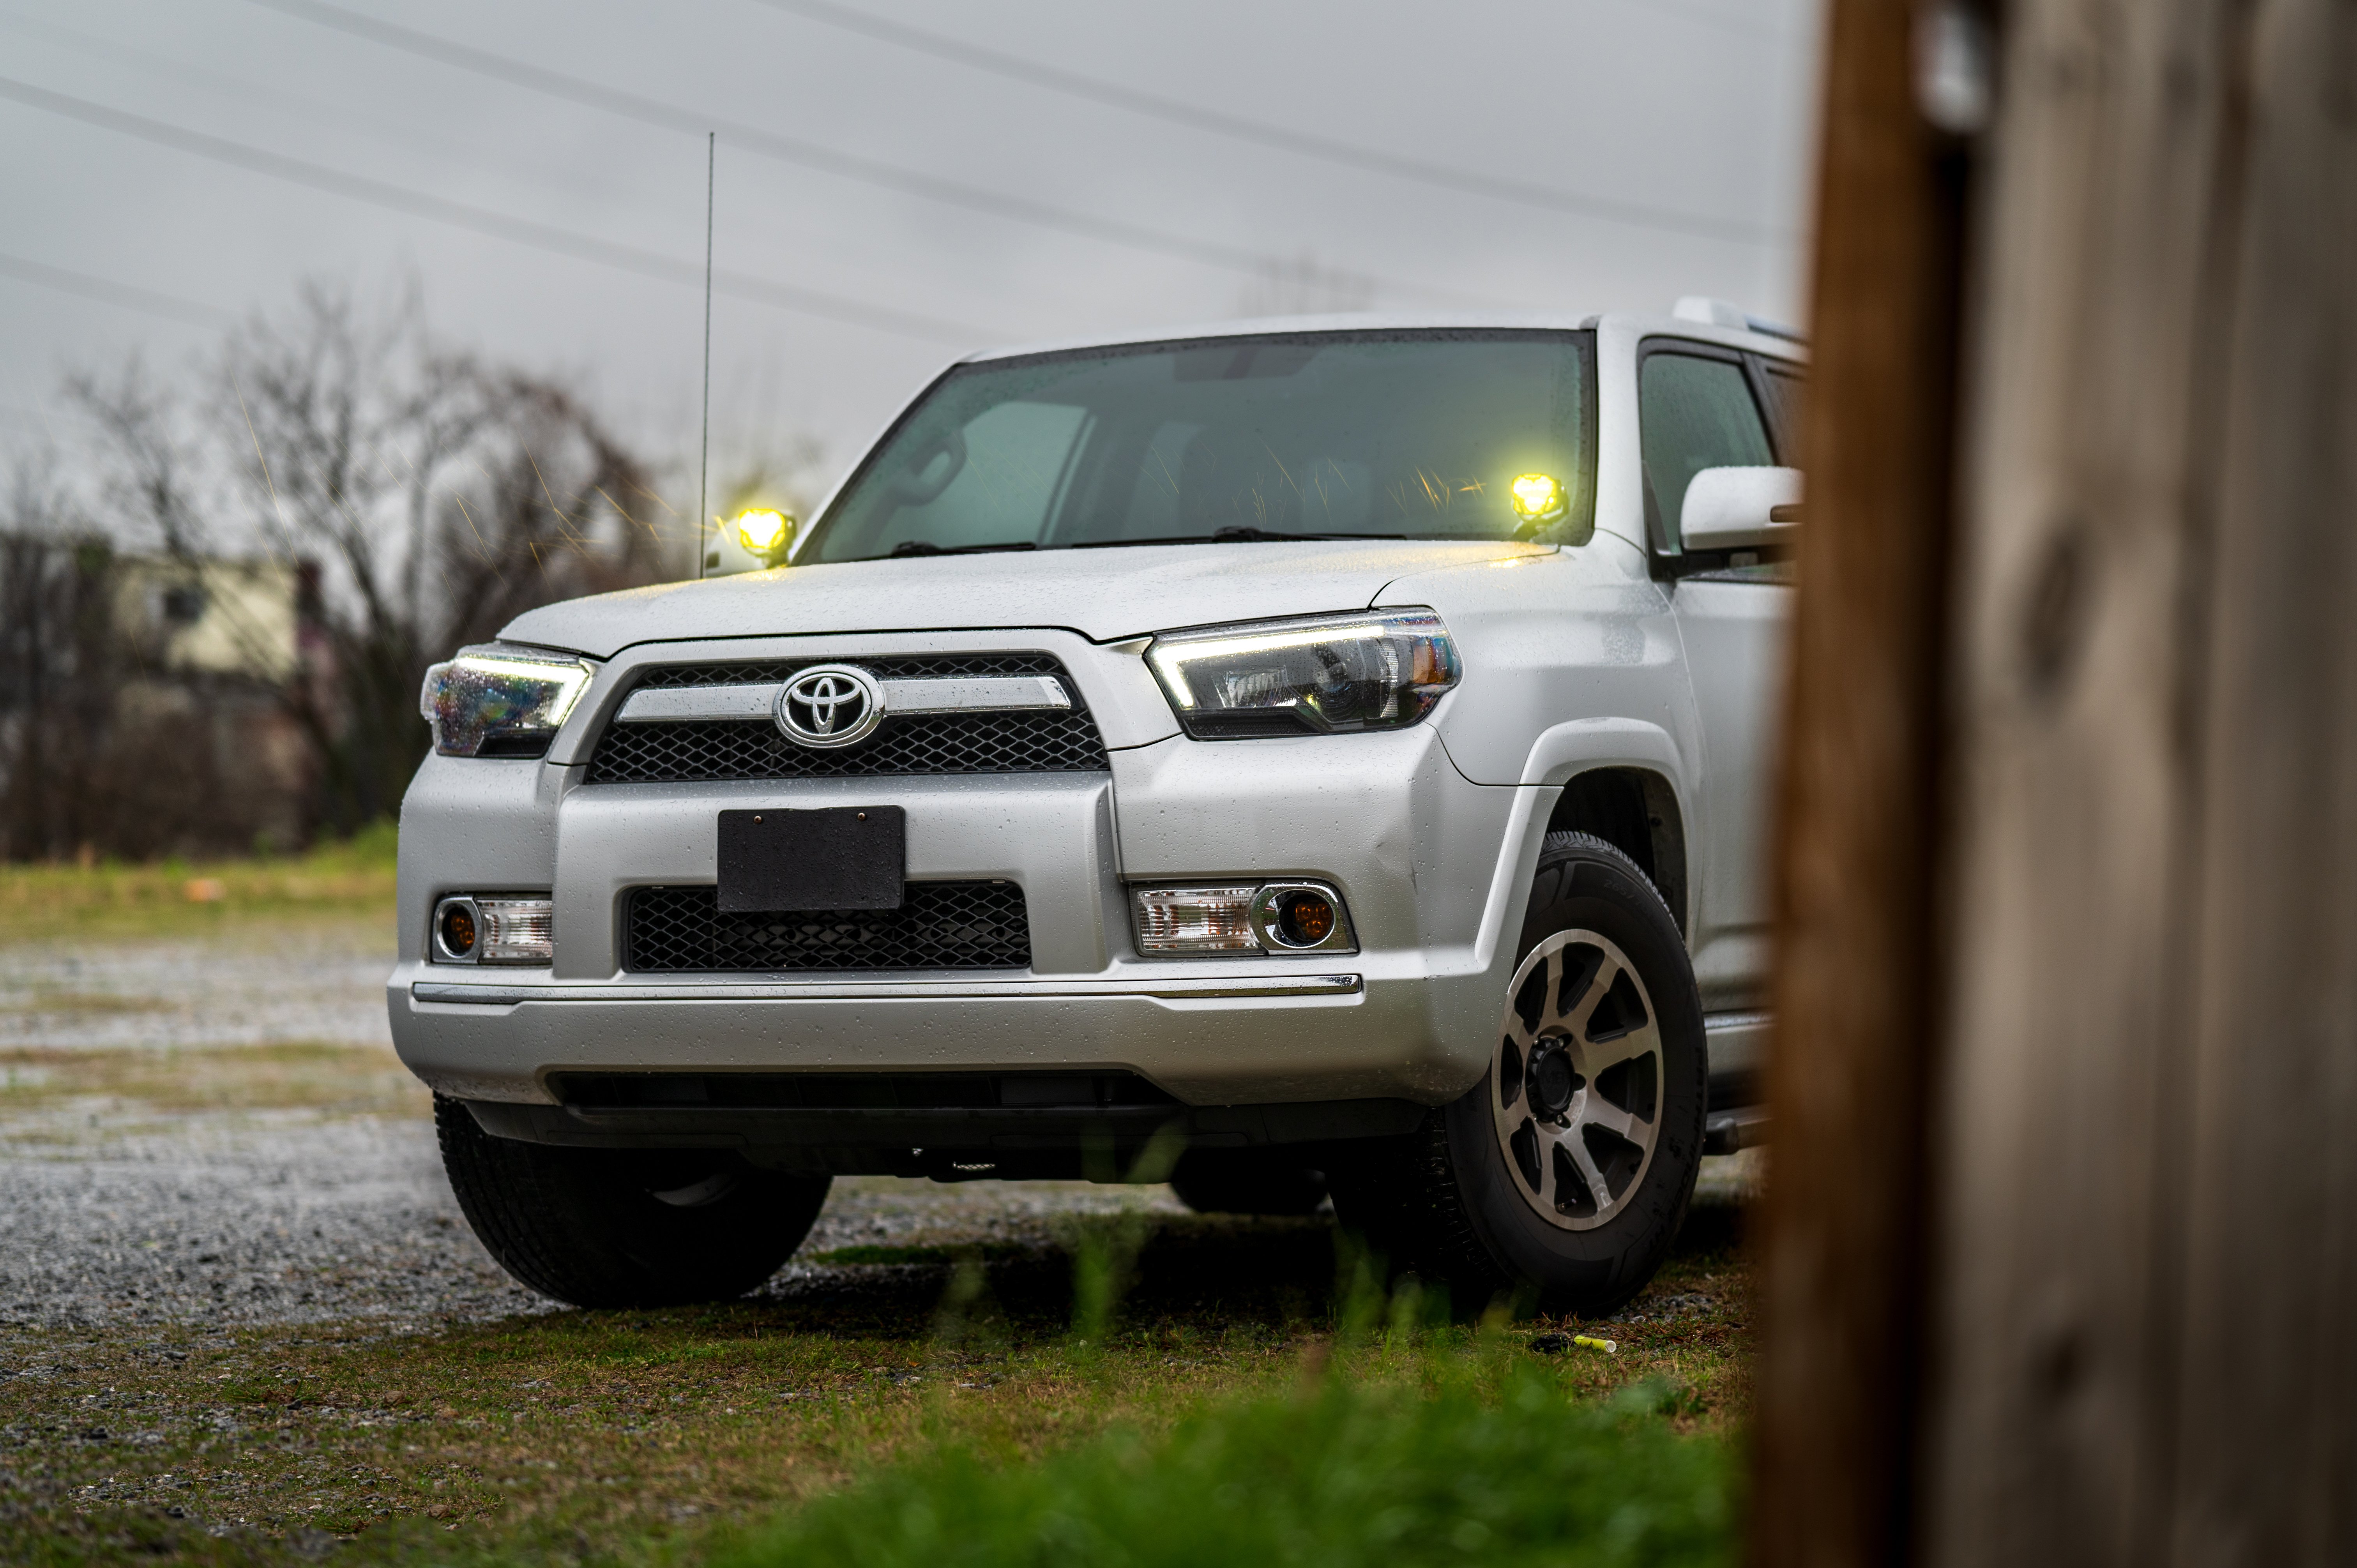 The BEST Ditch Pod Lights for the 2003 2009 Toyota 4Runner